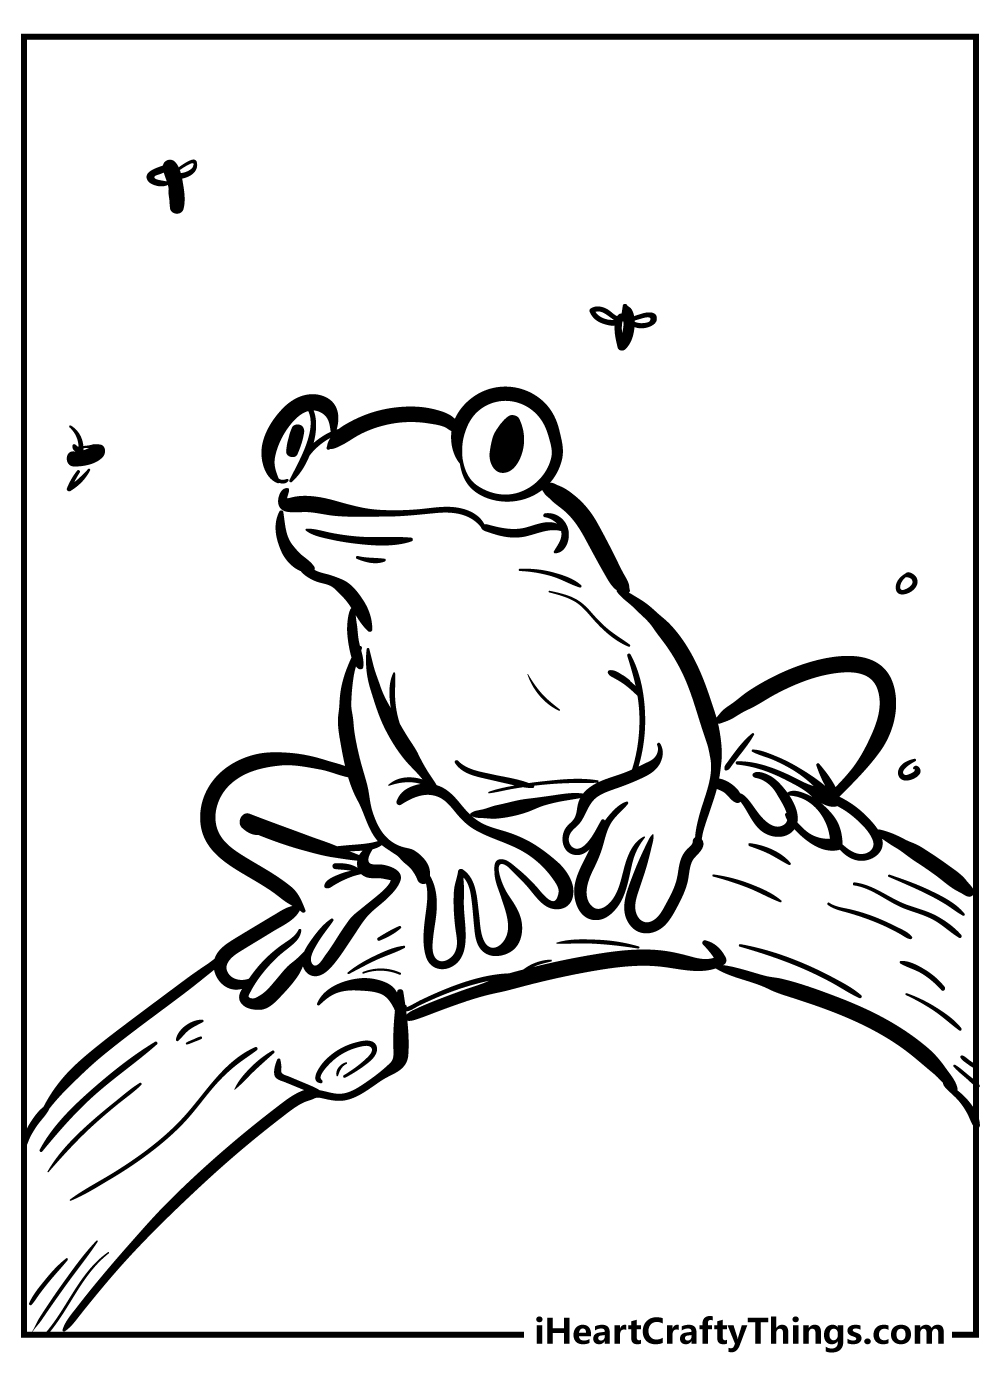 Frog coloring pages free printables